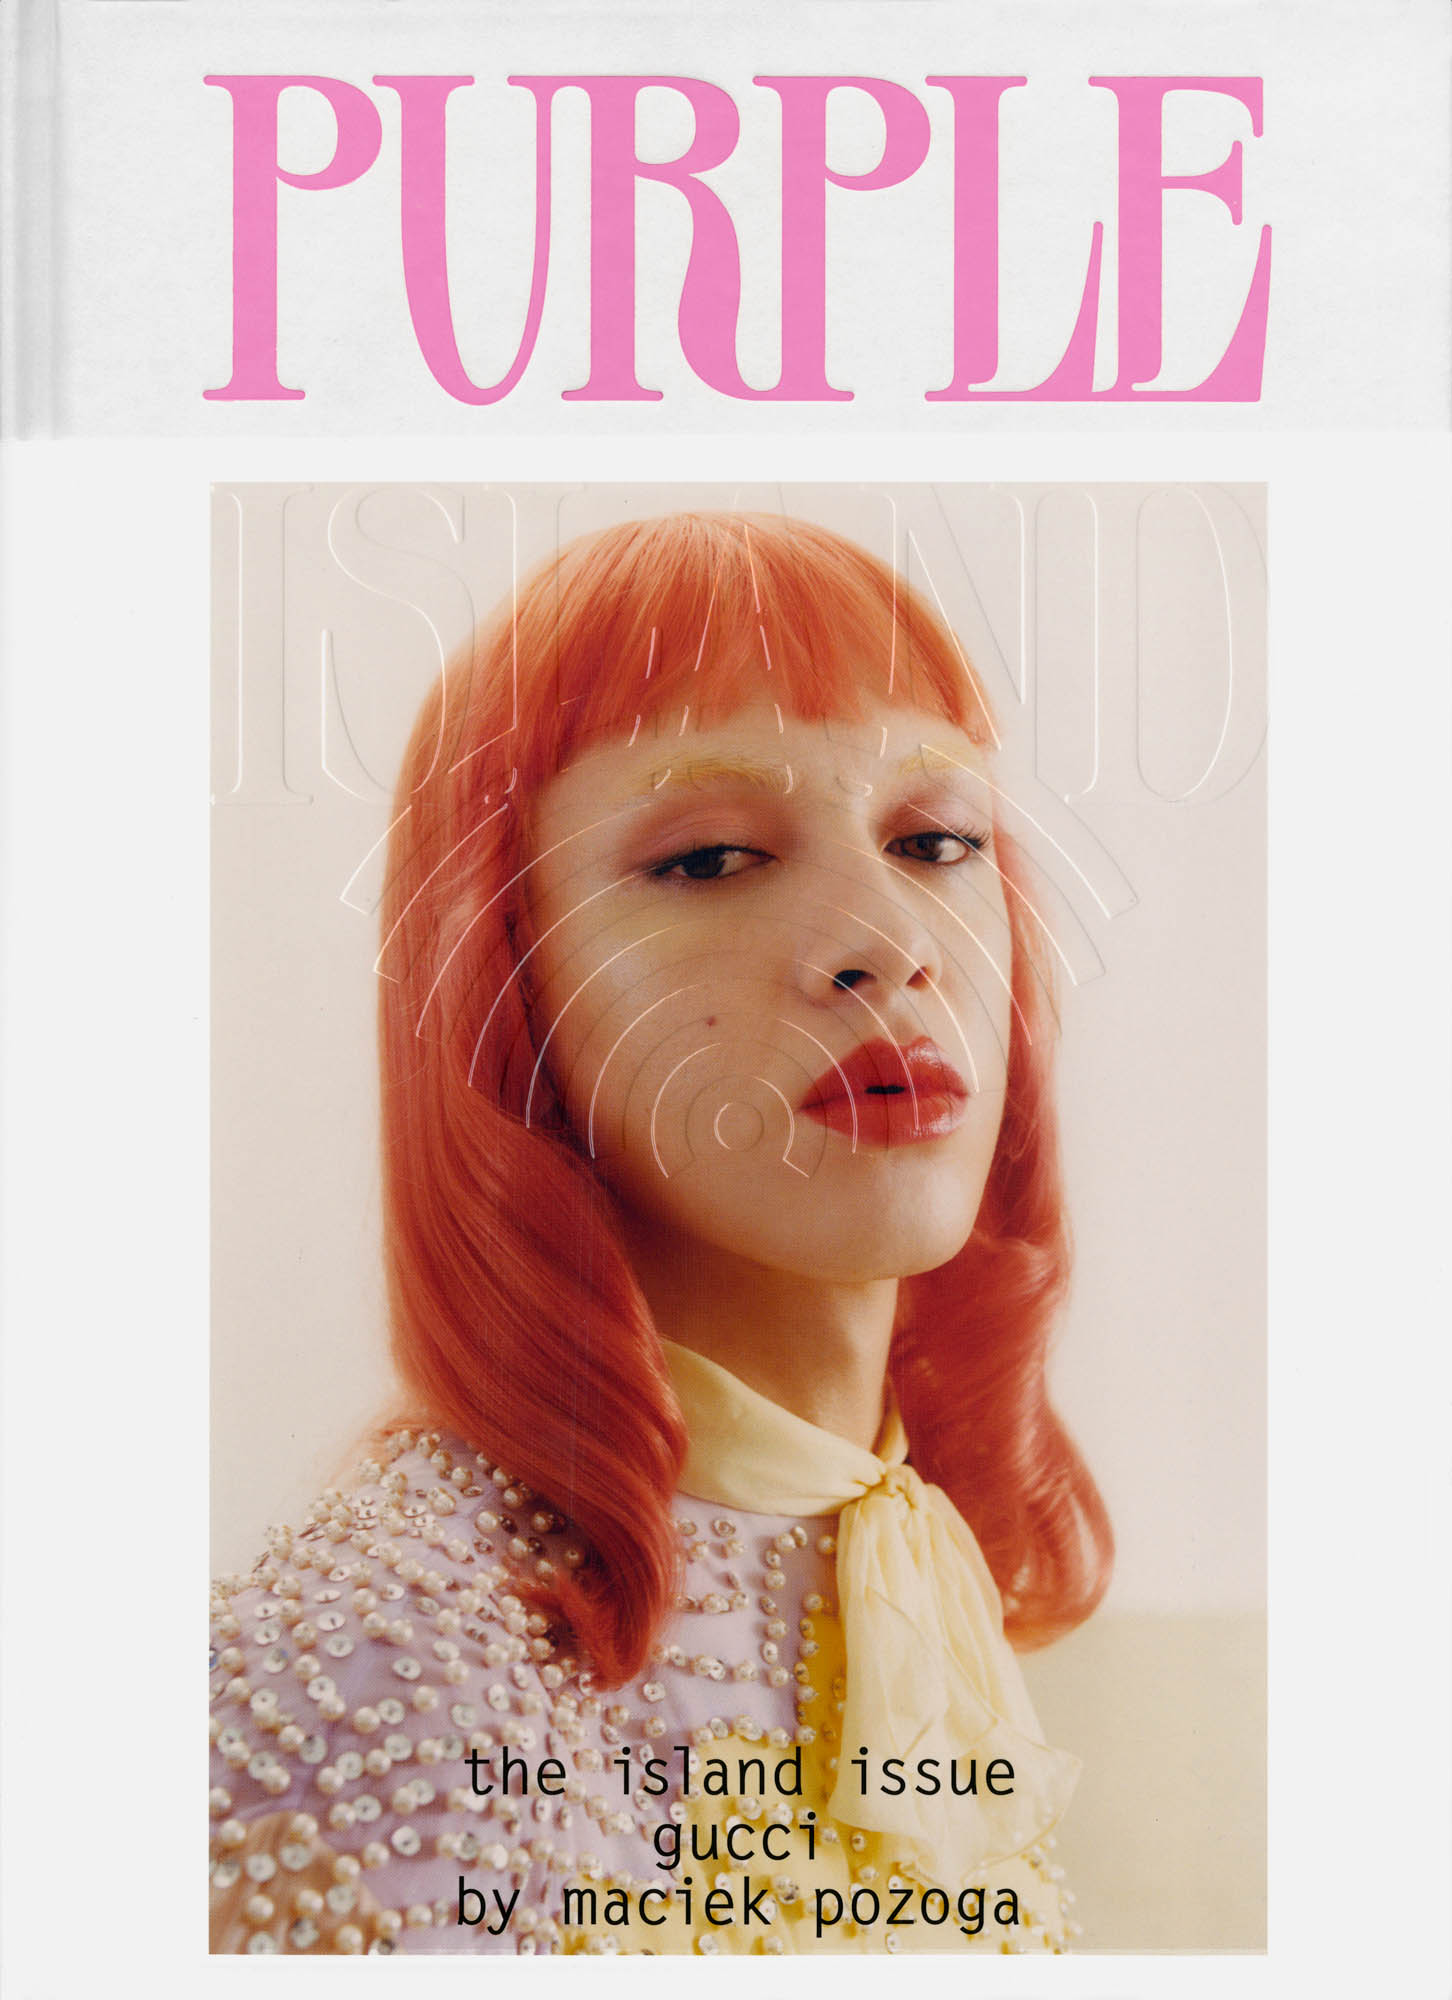 *Gucci* Special for *Purple Magazine*. Styling by Laetitia Gimenez. Featuring Bonnie Banane, Thee Dian, Le Diouck, Dourane Fall, Jane King, Petite Meller, Dustin Muchuvitz and Crystal Murray. *{Hair by Yann Turchi, Make up by Satoko Watanabe. Photo assistants : William Fleming and Alassan Diawara}* - © Maciek Pożoga